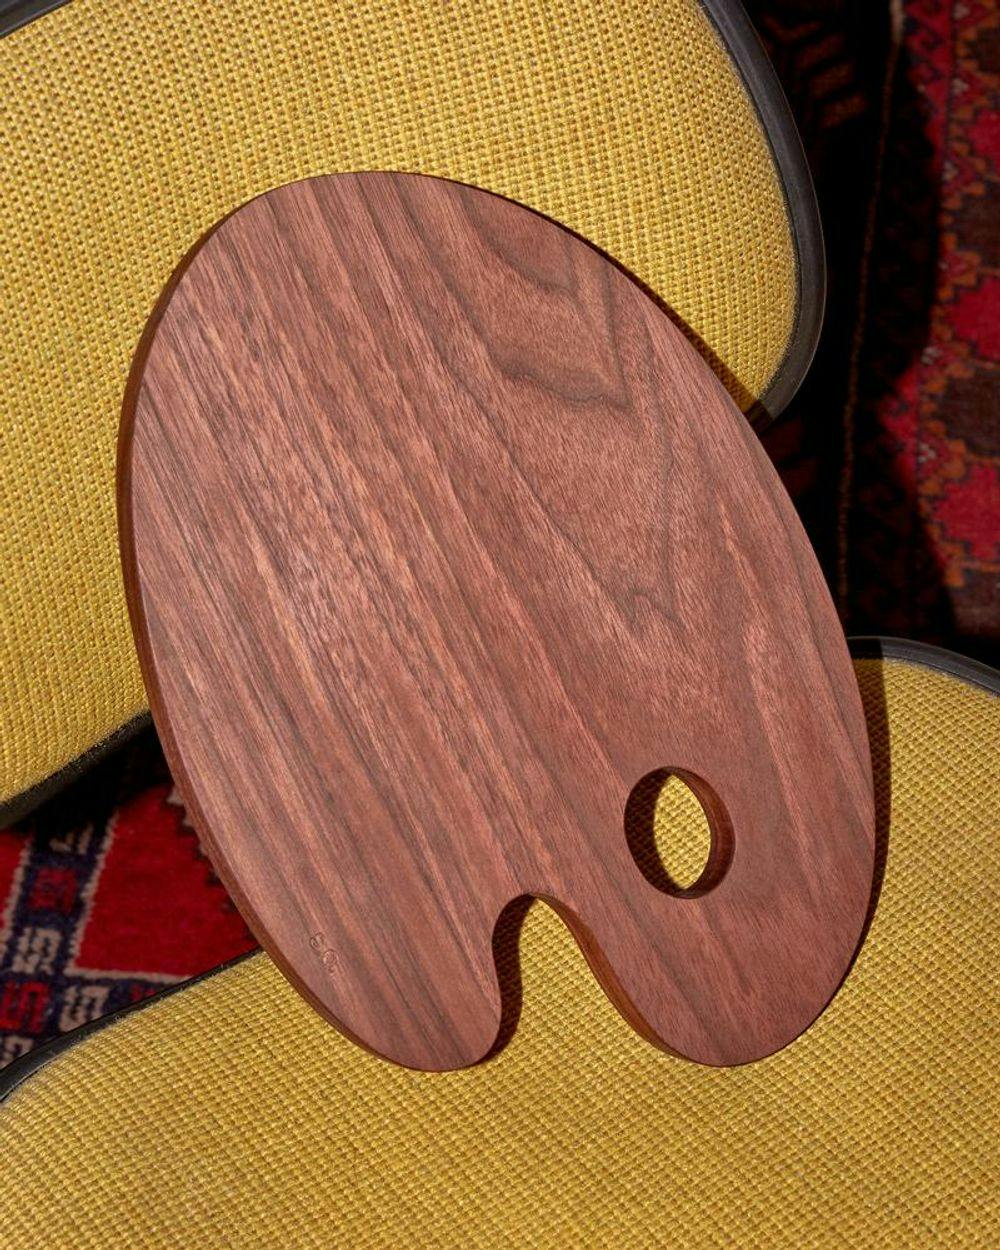 Main product image for Cutting Board (Walnut)